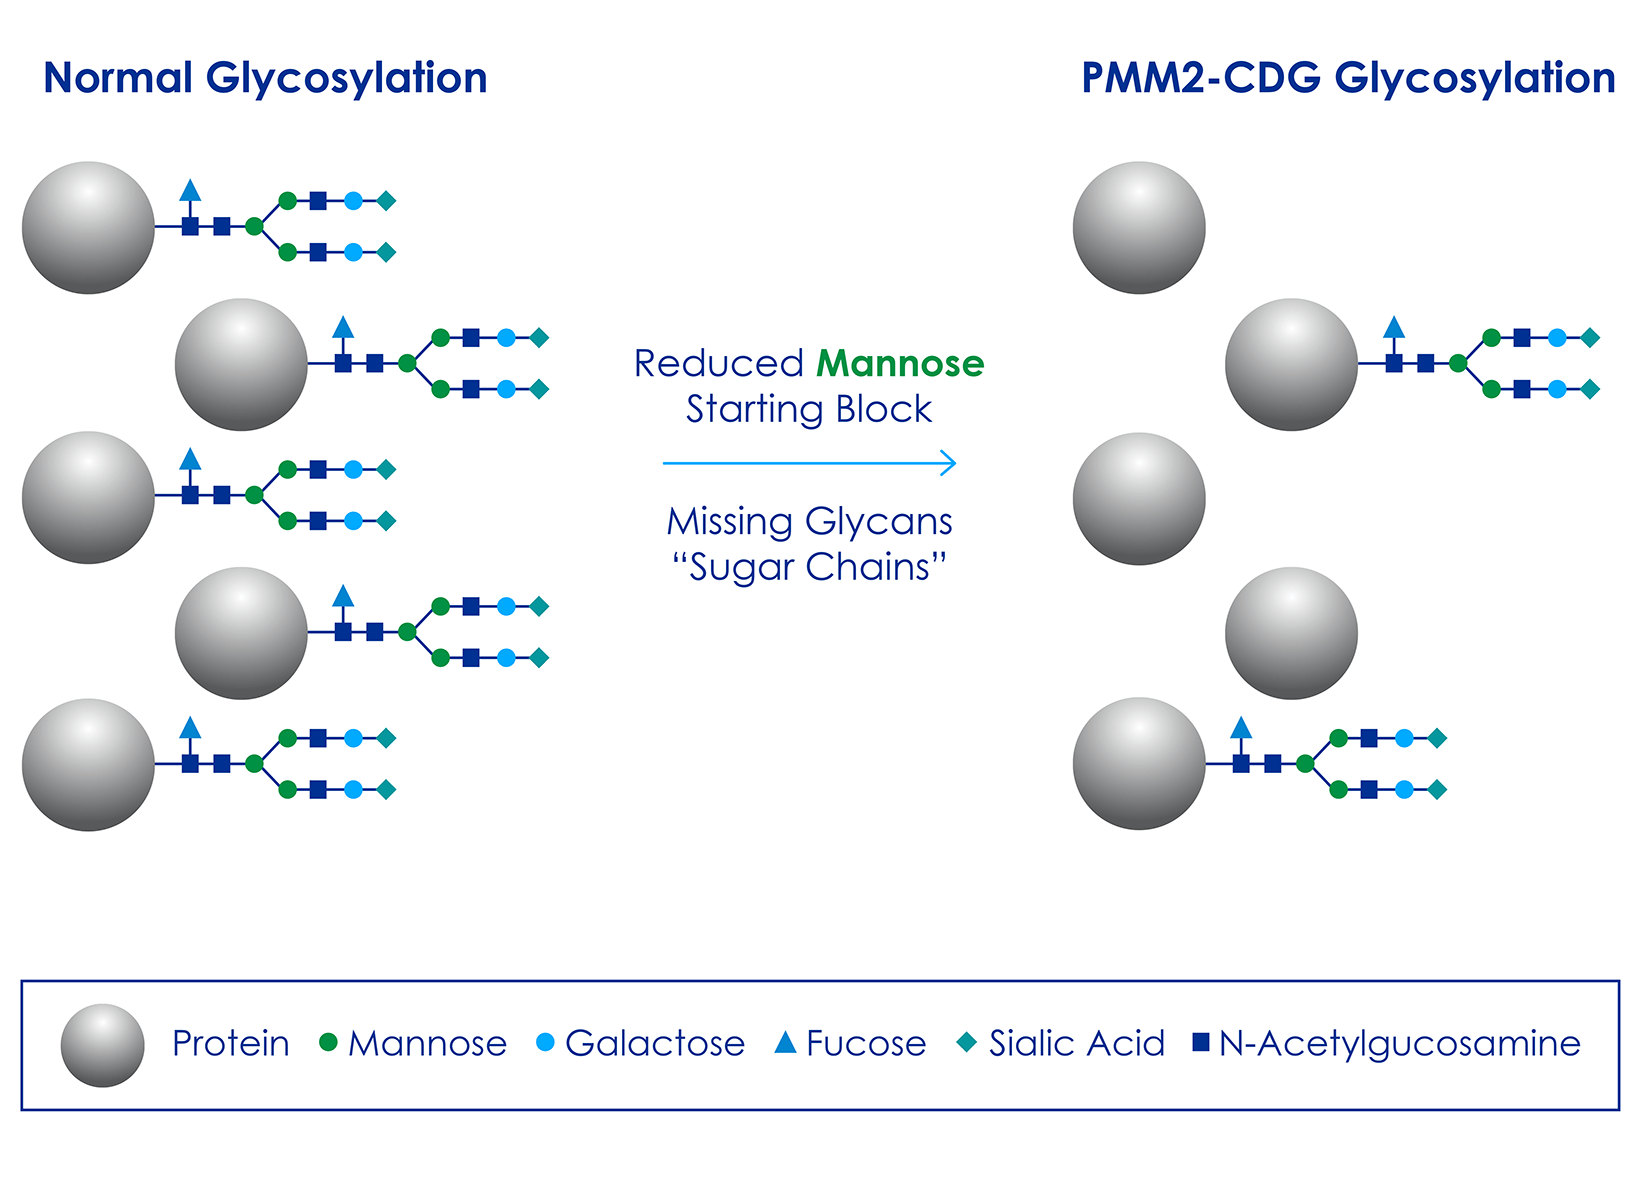 Glycosylation is essential for proper protein functioning